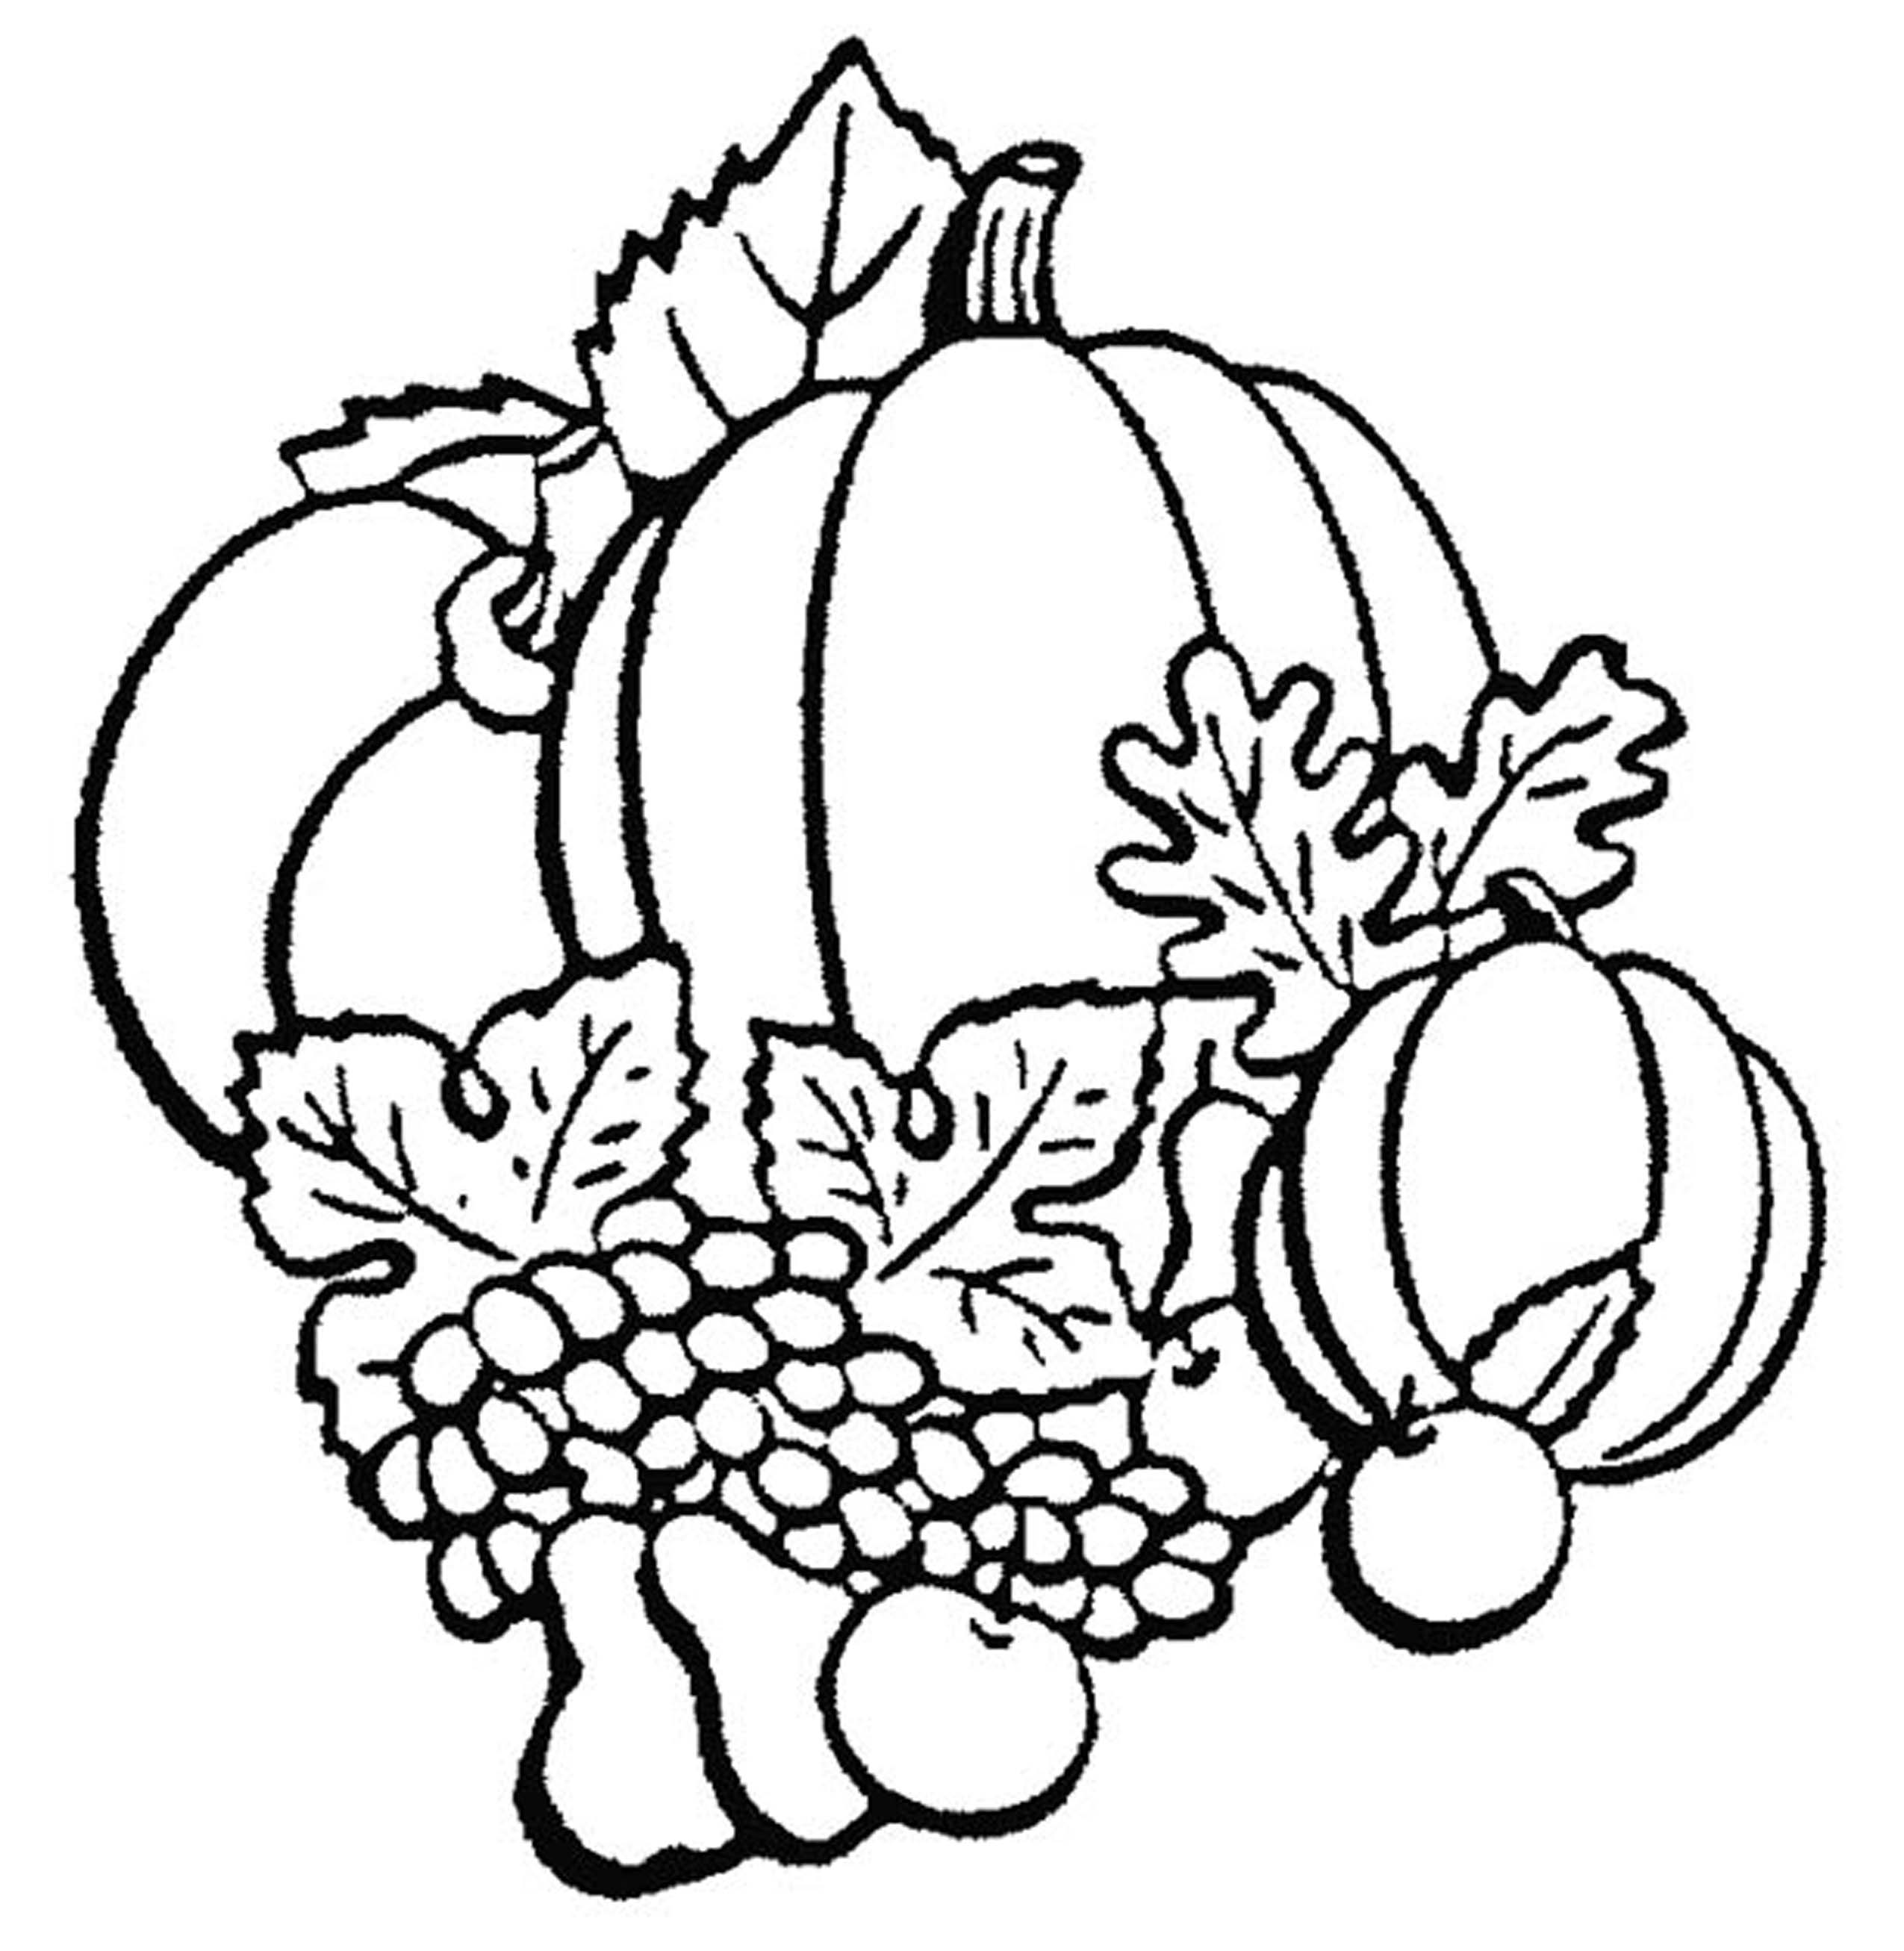 Fall Leaves Clip Art Coloring Pages At GetDrawings Free Download